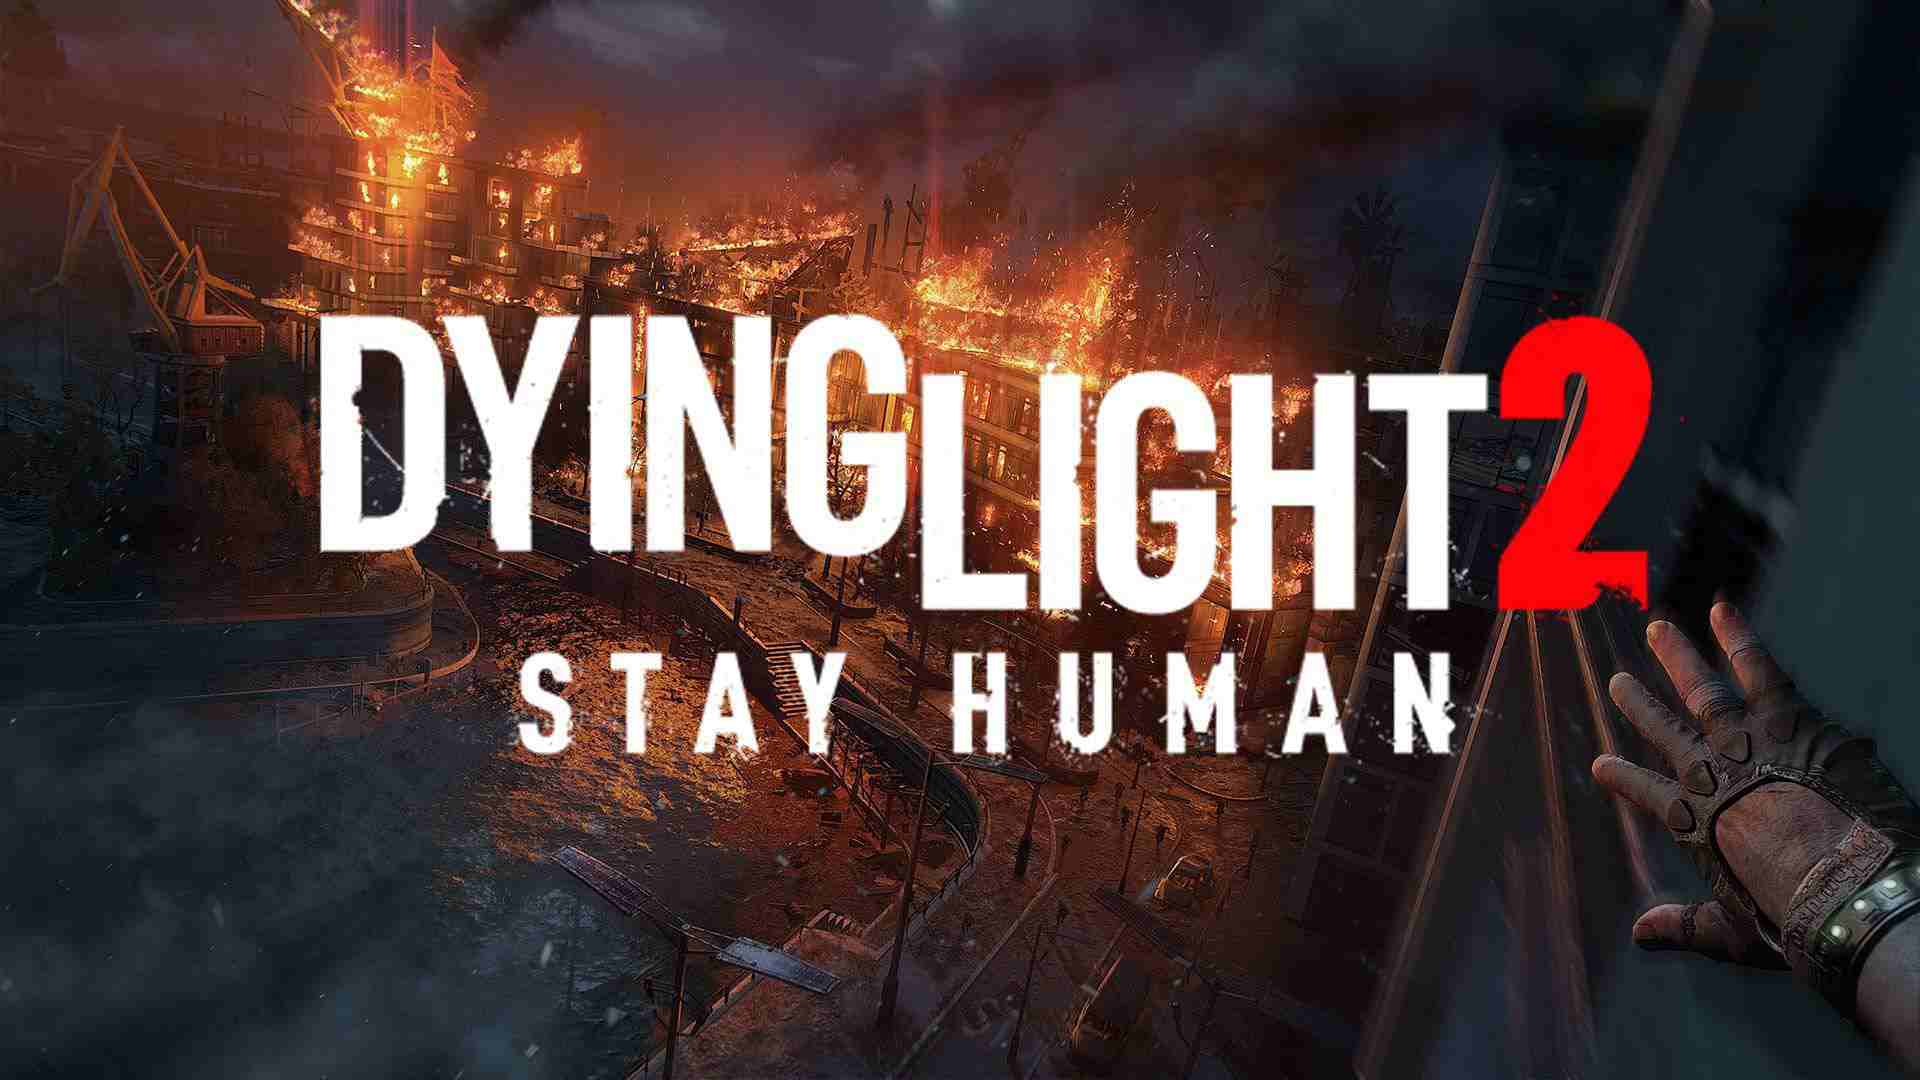 Dying Light 2 Update 1.31 Patch Notes - May 11, 2022